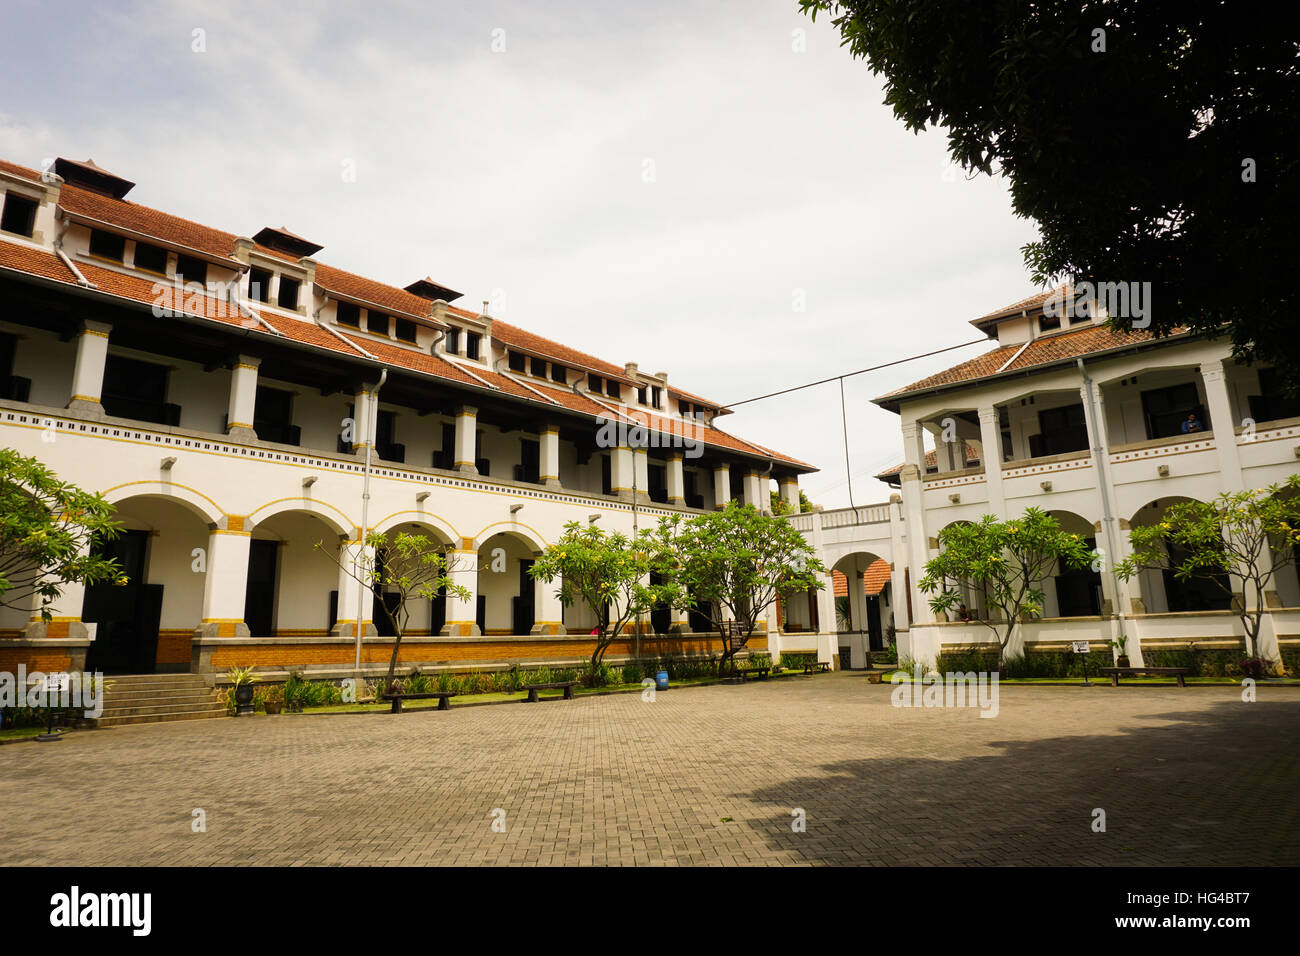 A large pavement field in the middle of Lawang Sewu building photo taken in Semarang Indonesia Stock Photo